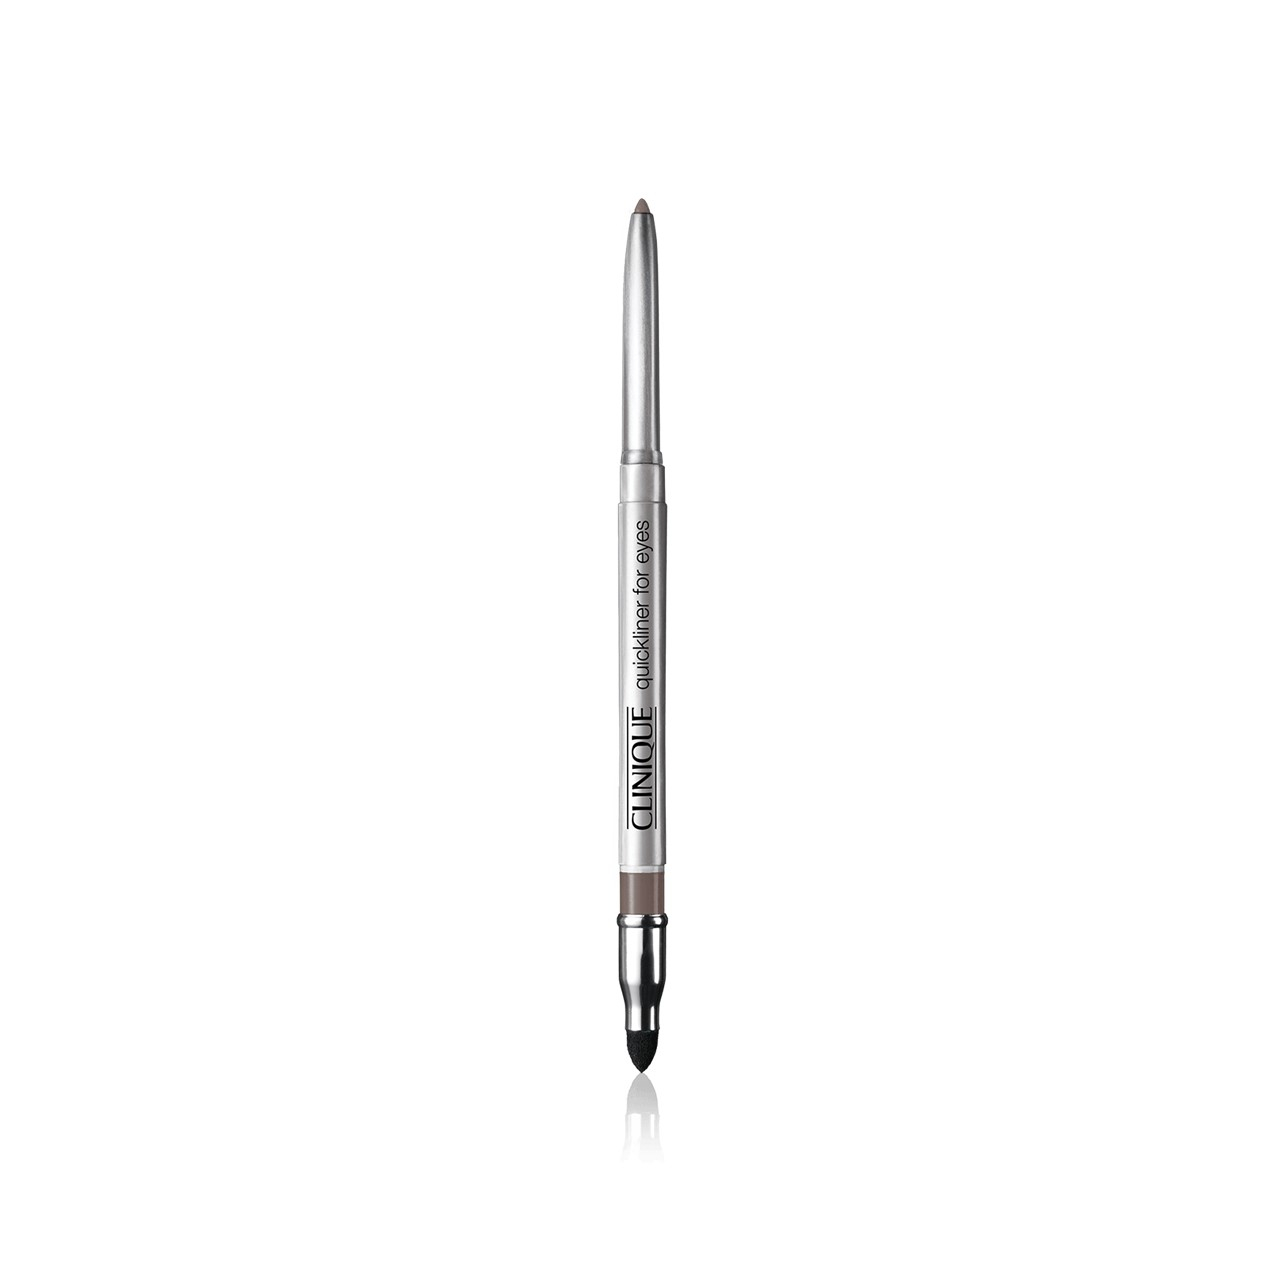 Clinique Quickliner For Eyes Smoky Brown 0.3g (0.01oz)